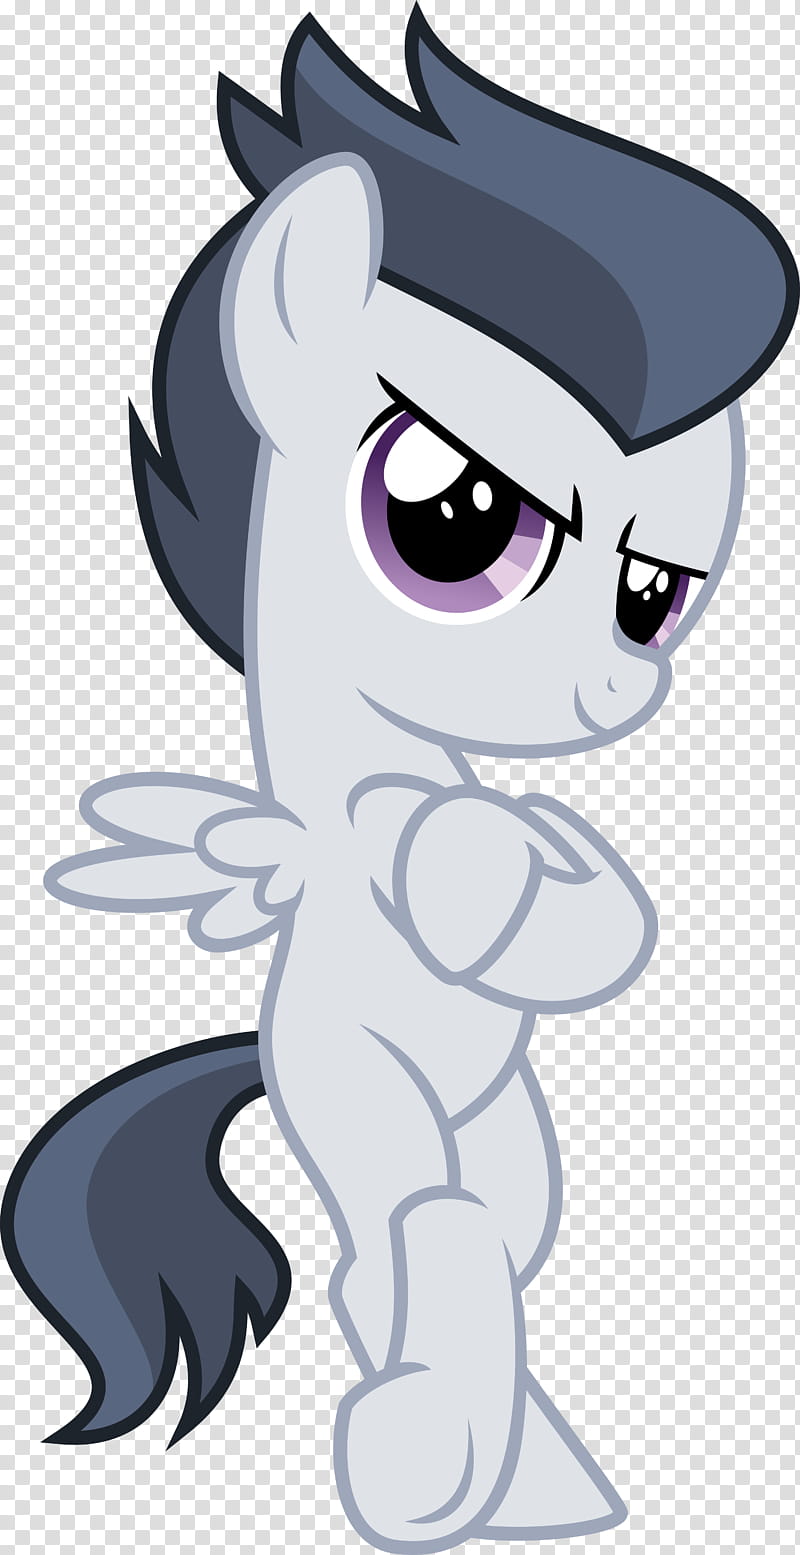 Swag Rumble, grey My Little Pony character illustration transparent background PNG clipart